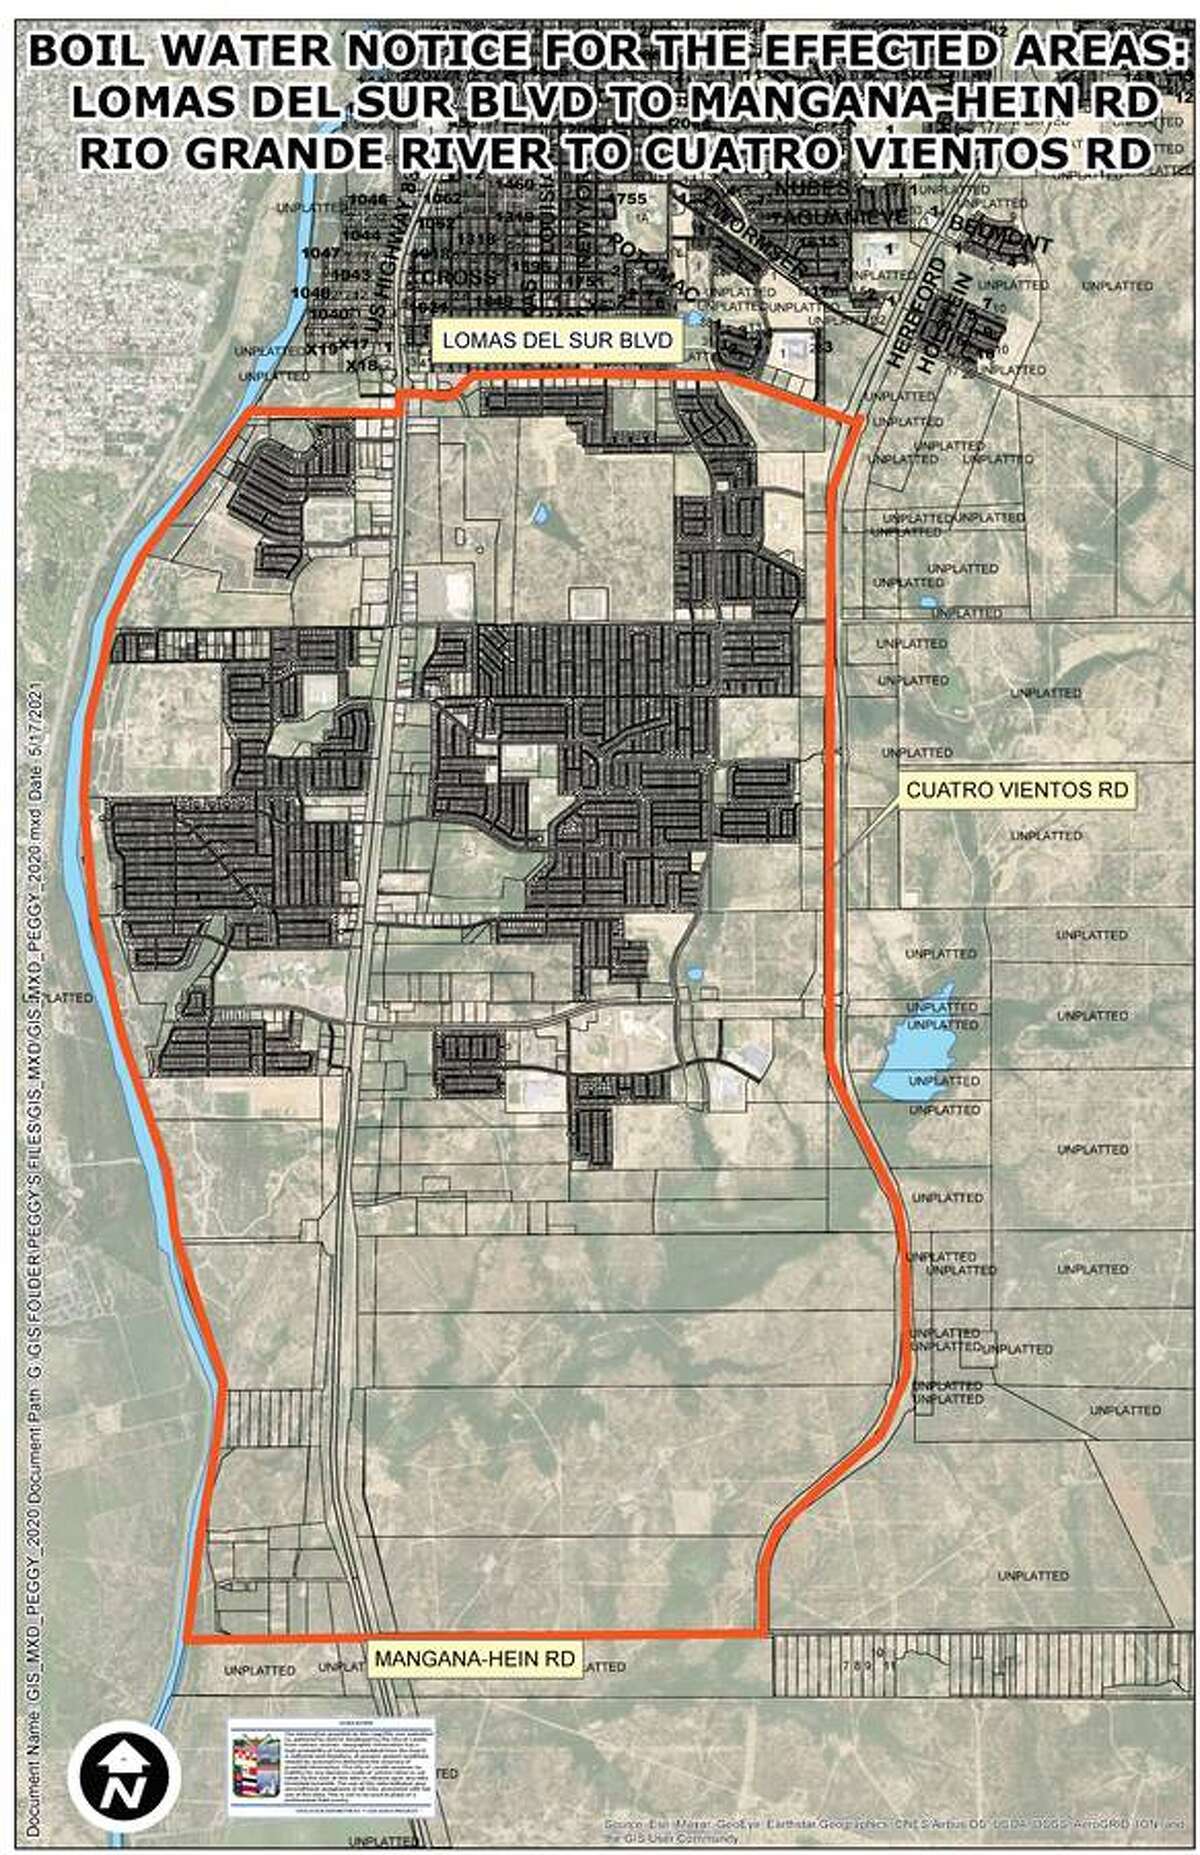 This map shows the area affected by the boil water notice issued by the City of Laredo. 